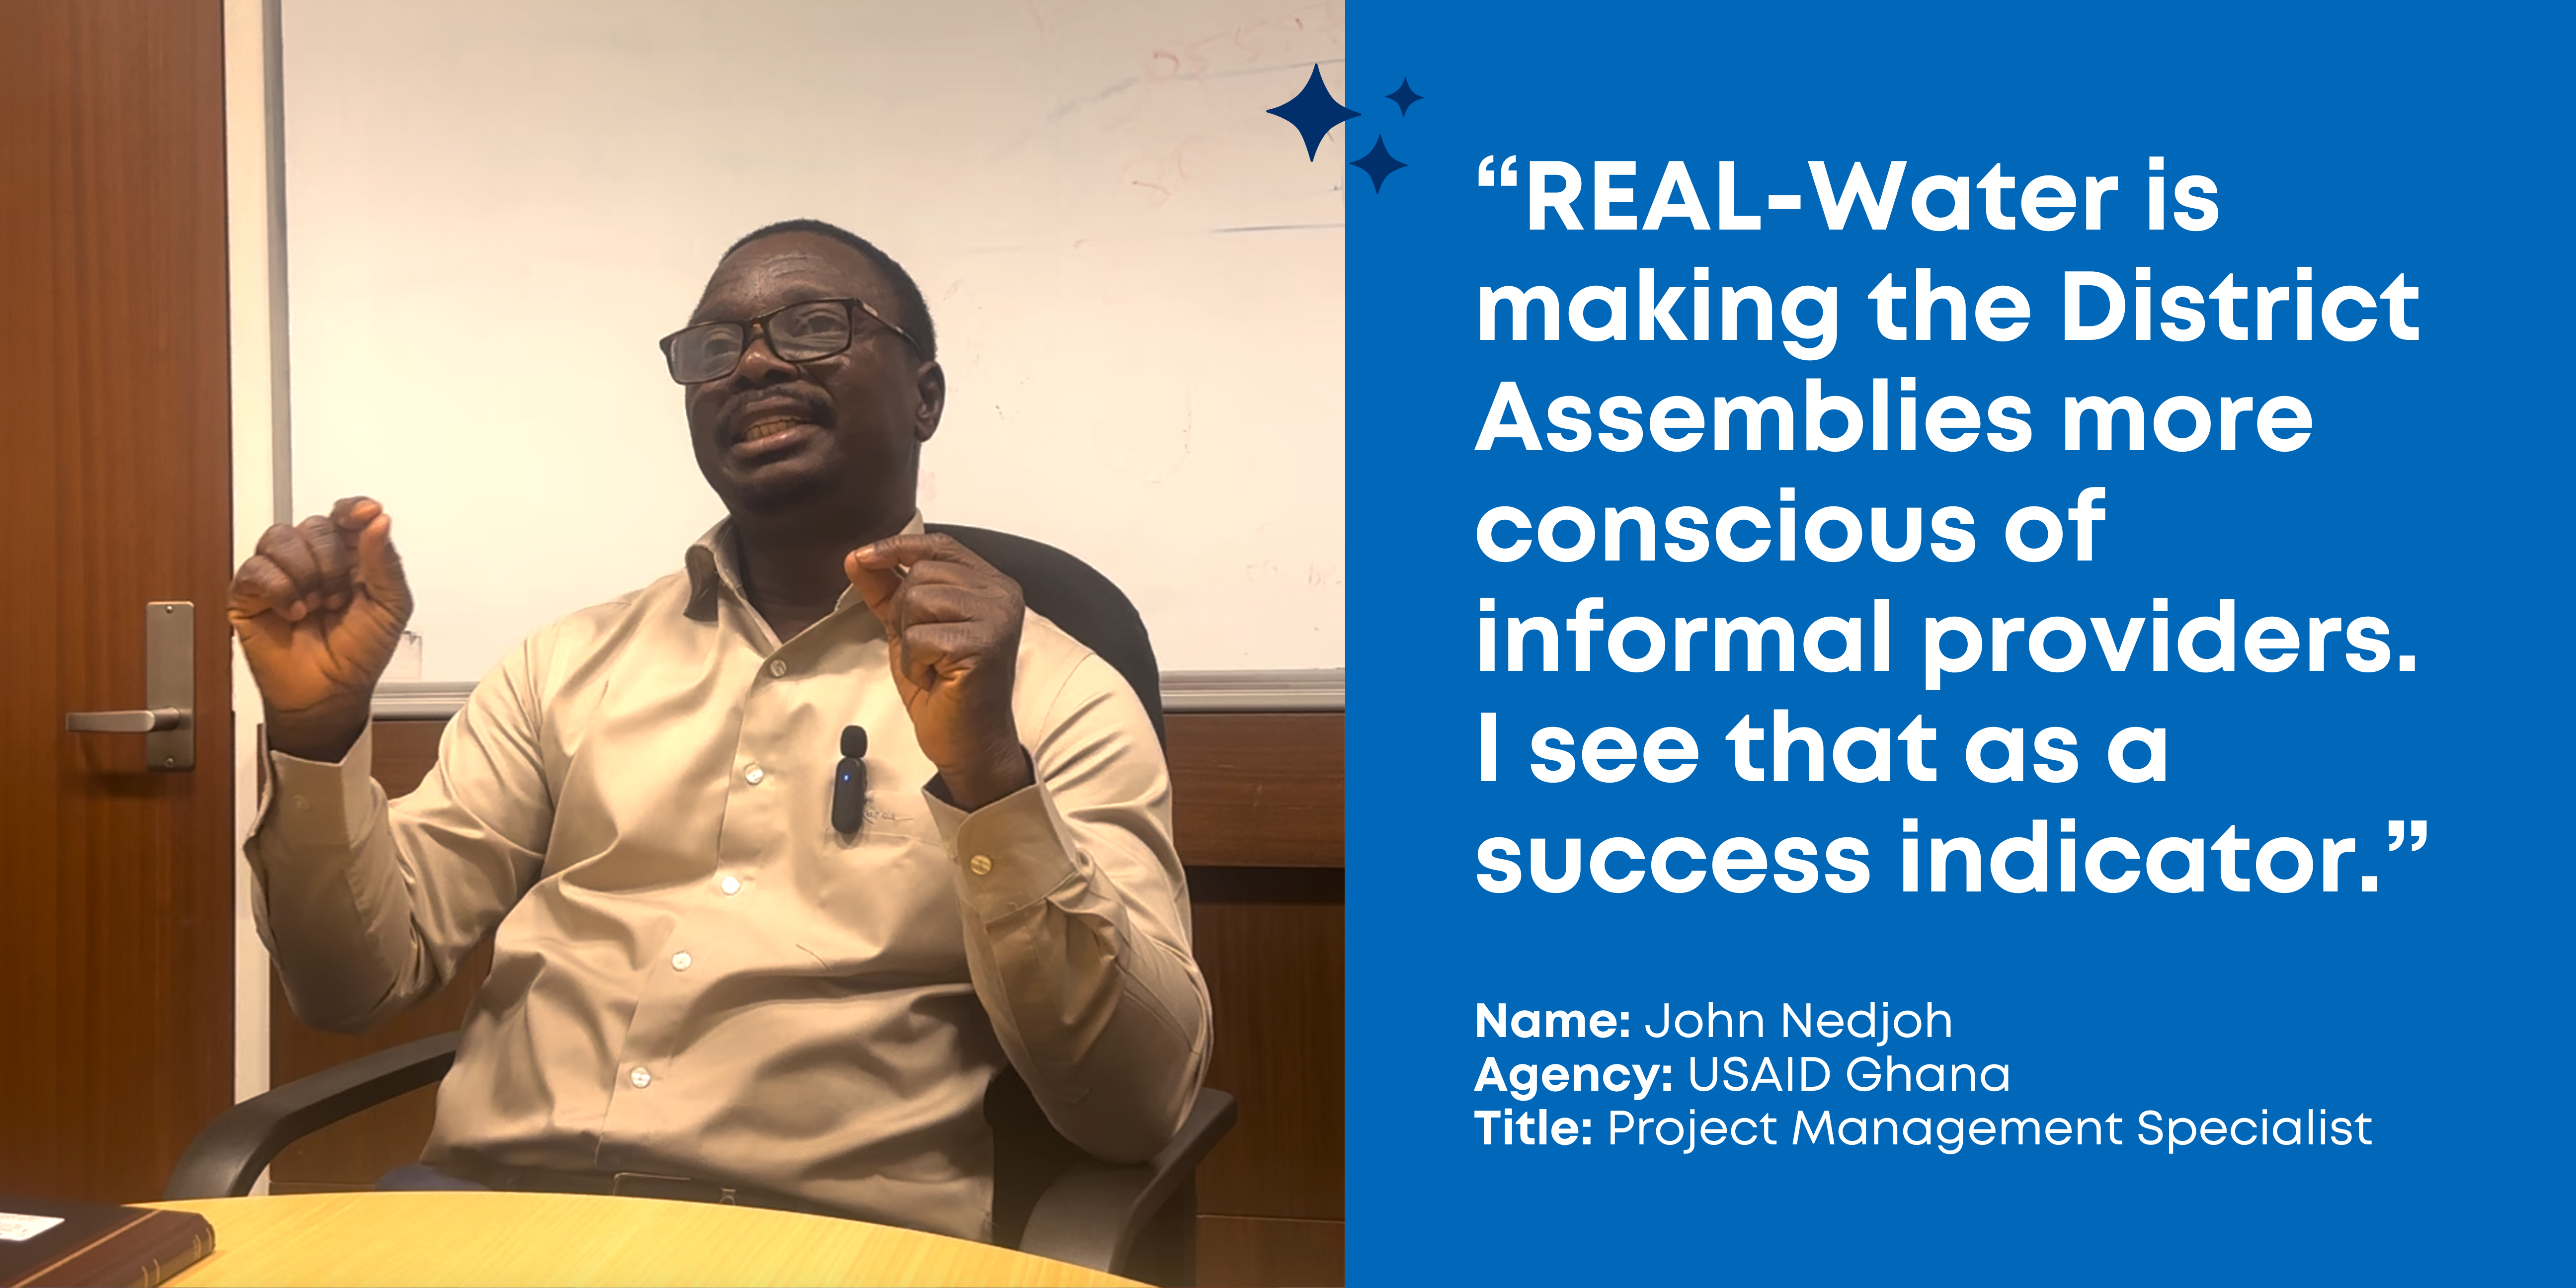 USAID Project Management Specialist, John Nedjoh, sits in an office chair wearing a beige collared shirt and gestures with his hands: "REAL-Water is making the District Assemblies more conscious of informal providers. I see that as a success indicator."